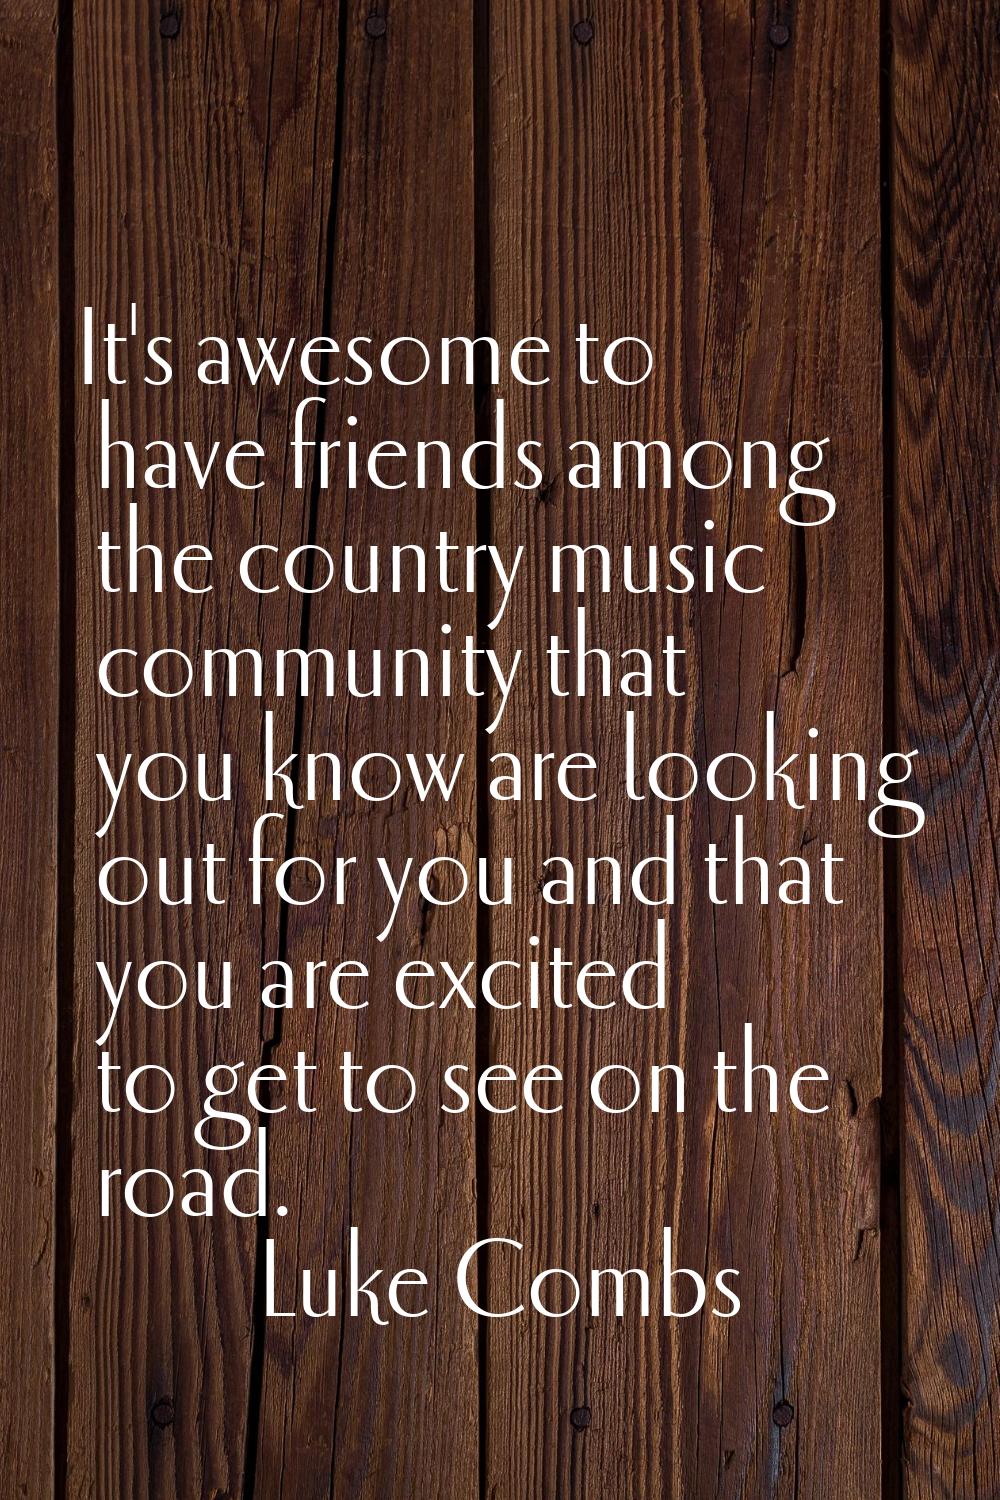 It's awesome to have friends among the country music community that you know are looking out for yo